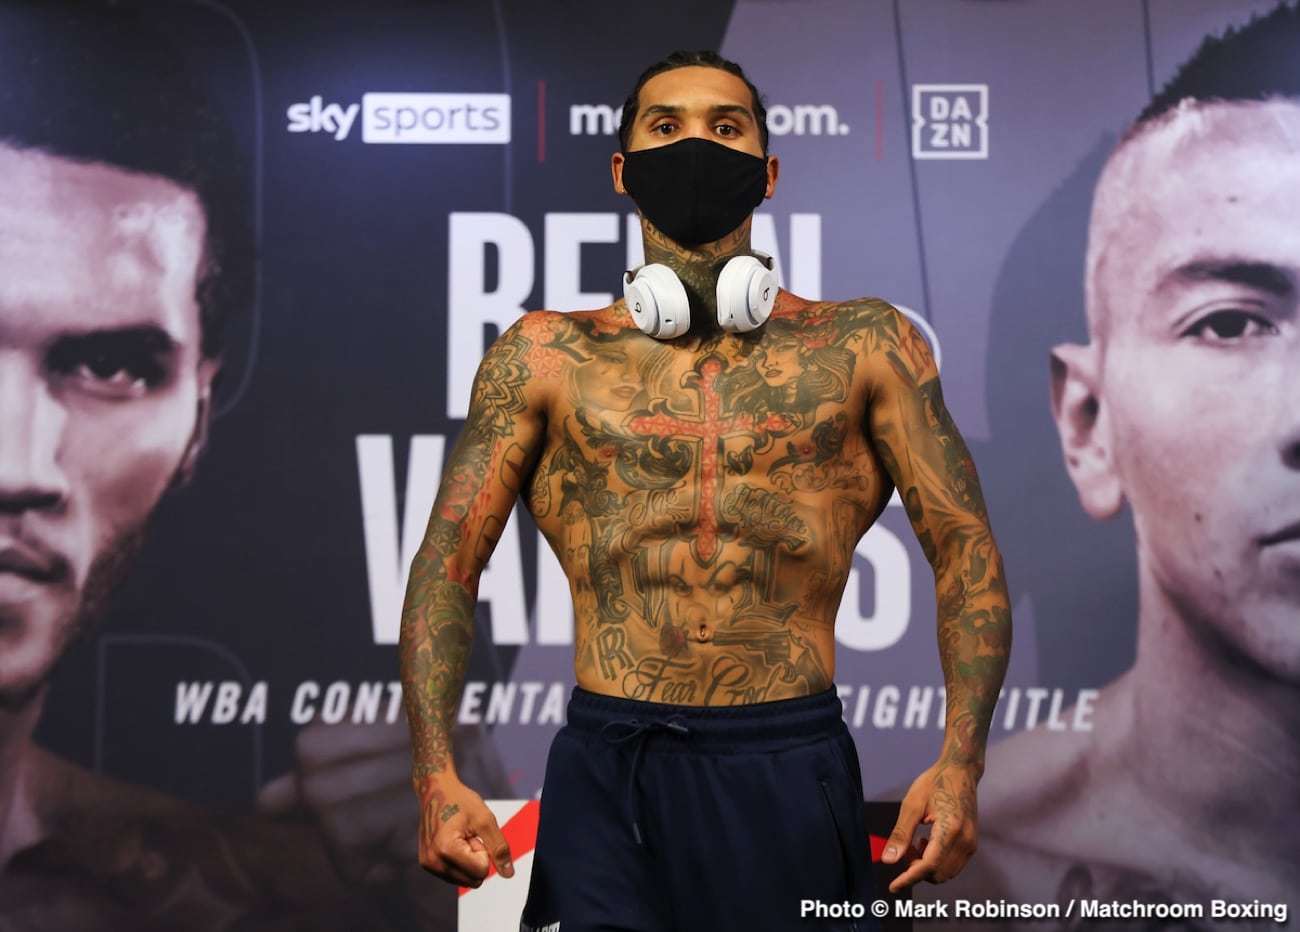 Image: Conor Benn 146.75 vs. Samuel Vargas 146.25 - official weigh-in results